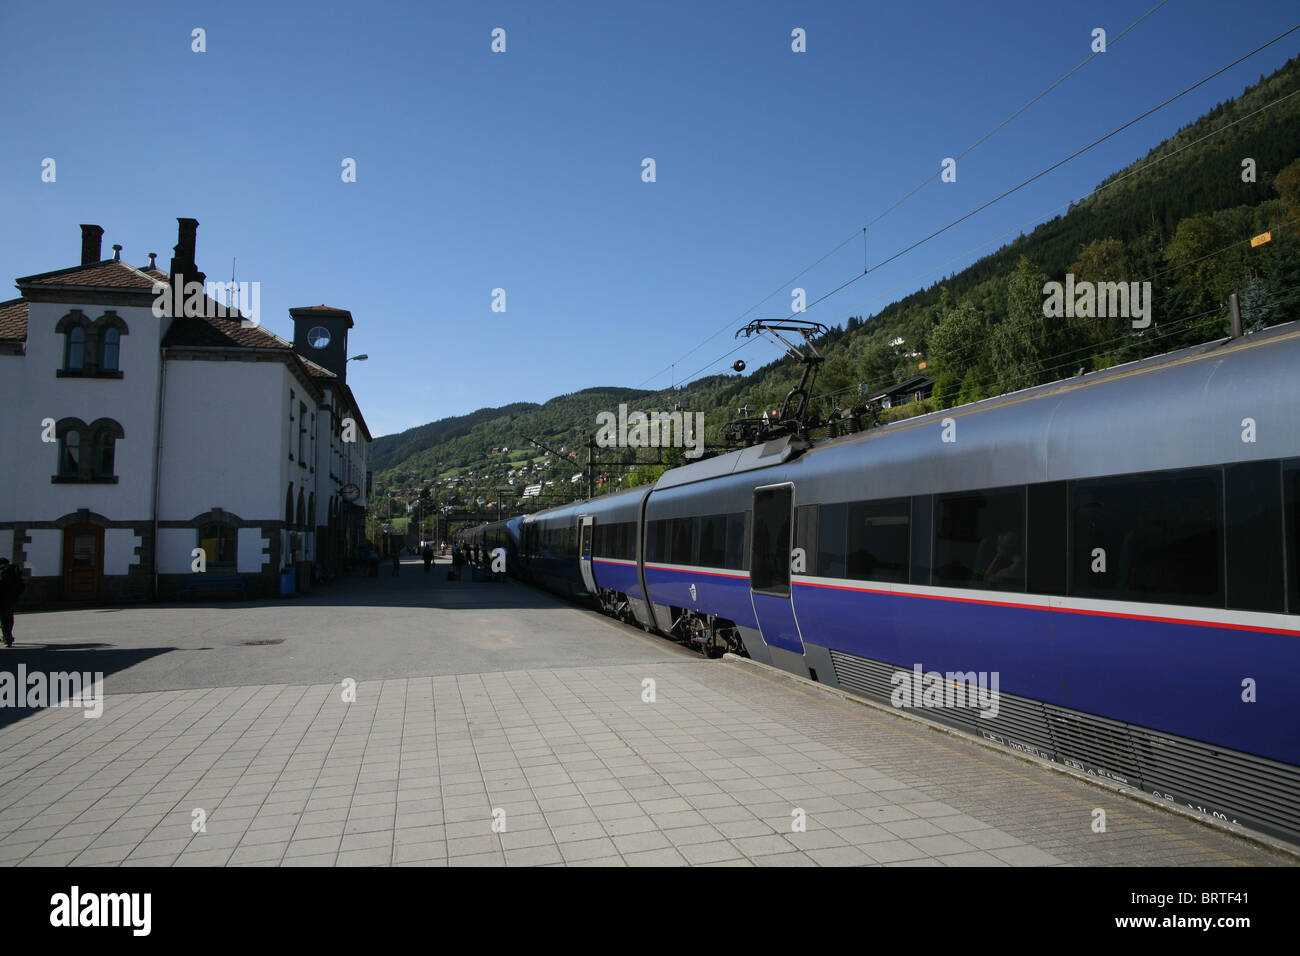 Train in a station on its way to to Bergen from Oslo Stock Photo